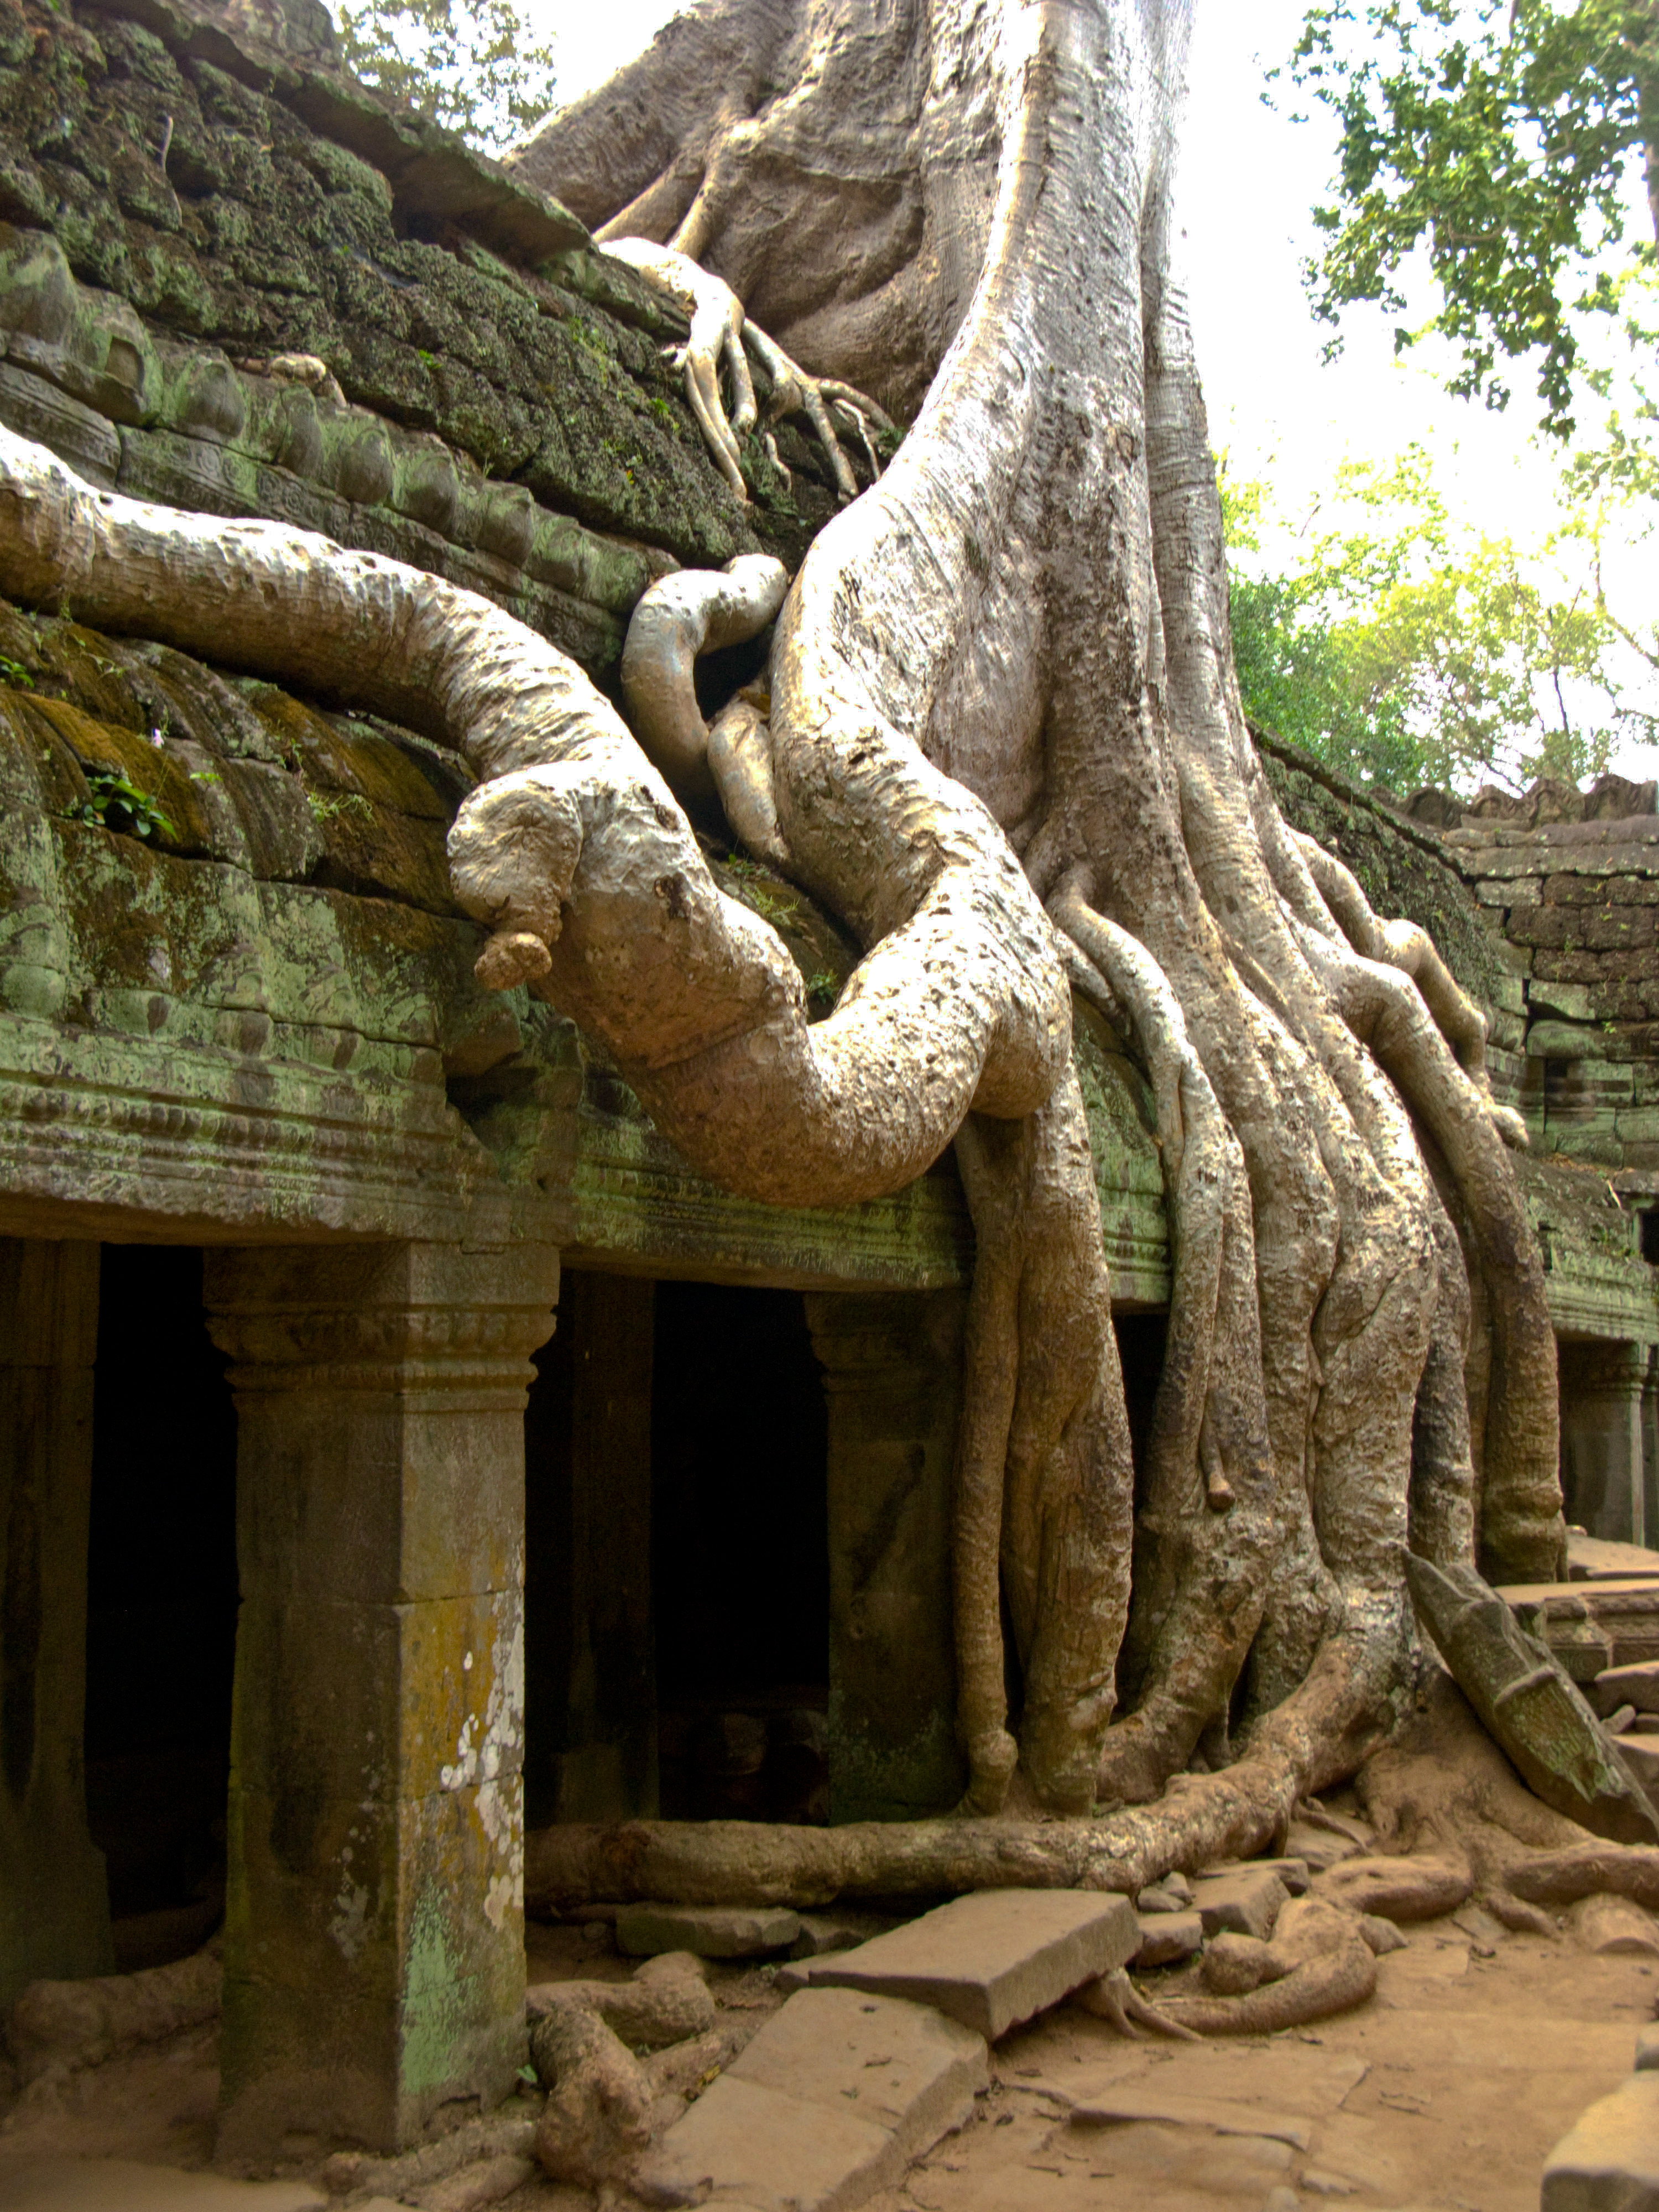 Rampant growth characterizes almost every ruin in Cambodia. The fig trees threaten to swallow the roof of this temple.